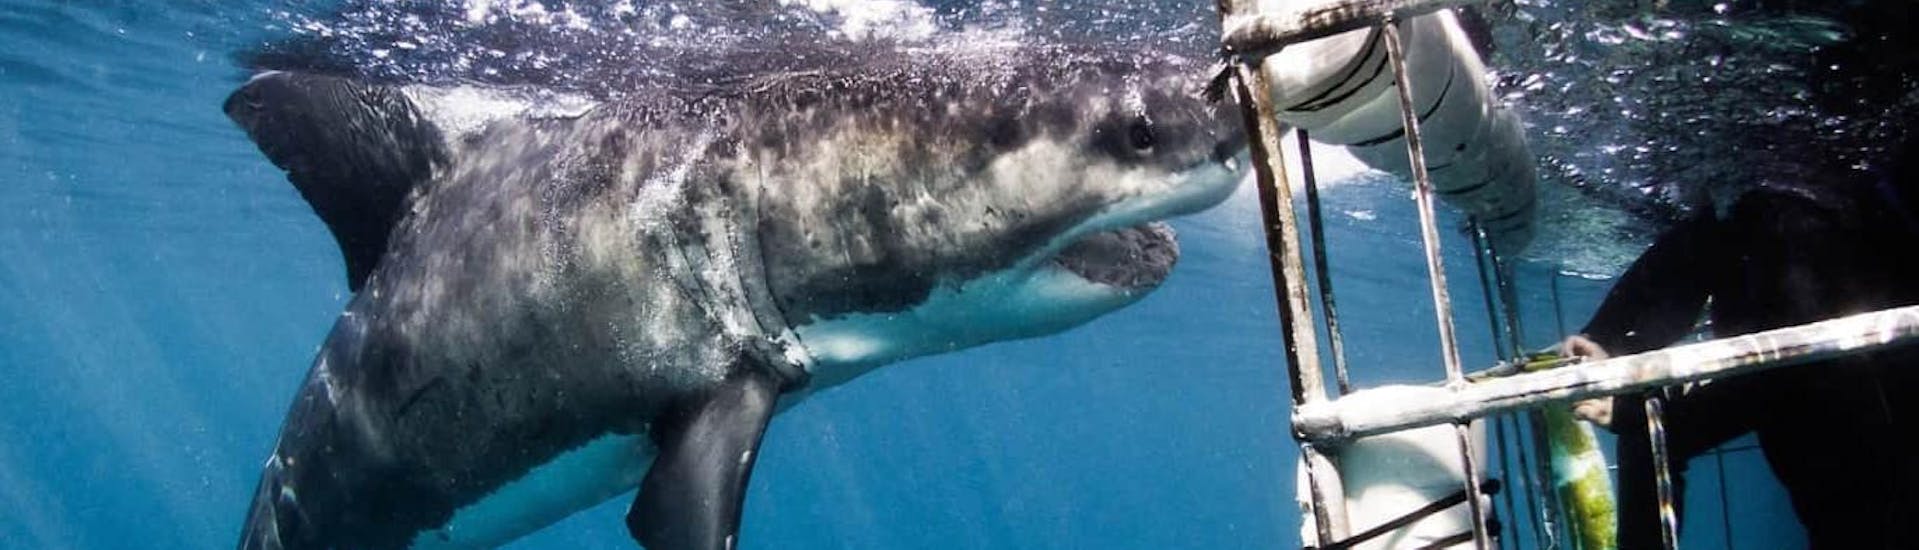 Shark Cage Diving in Gansbaai - Transfer from Cape Town with White Shark Diving Company - Gansbaai - Hero image